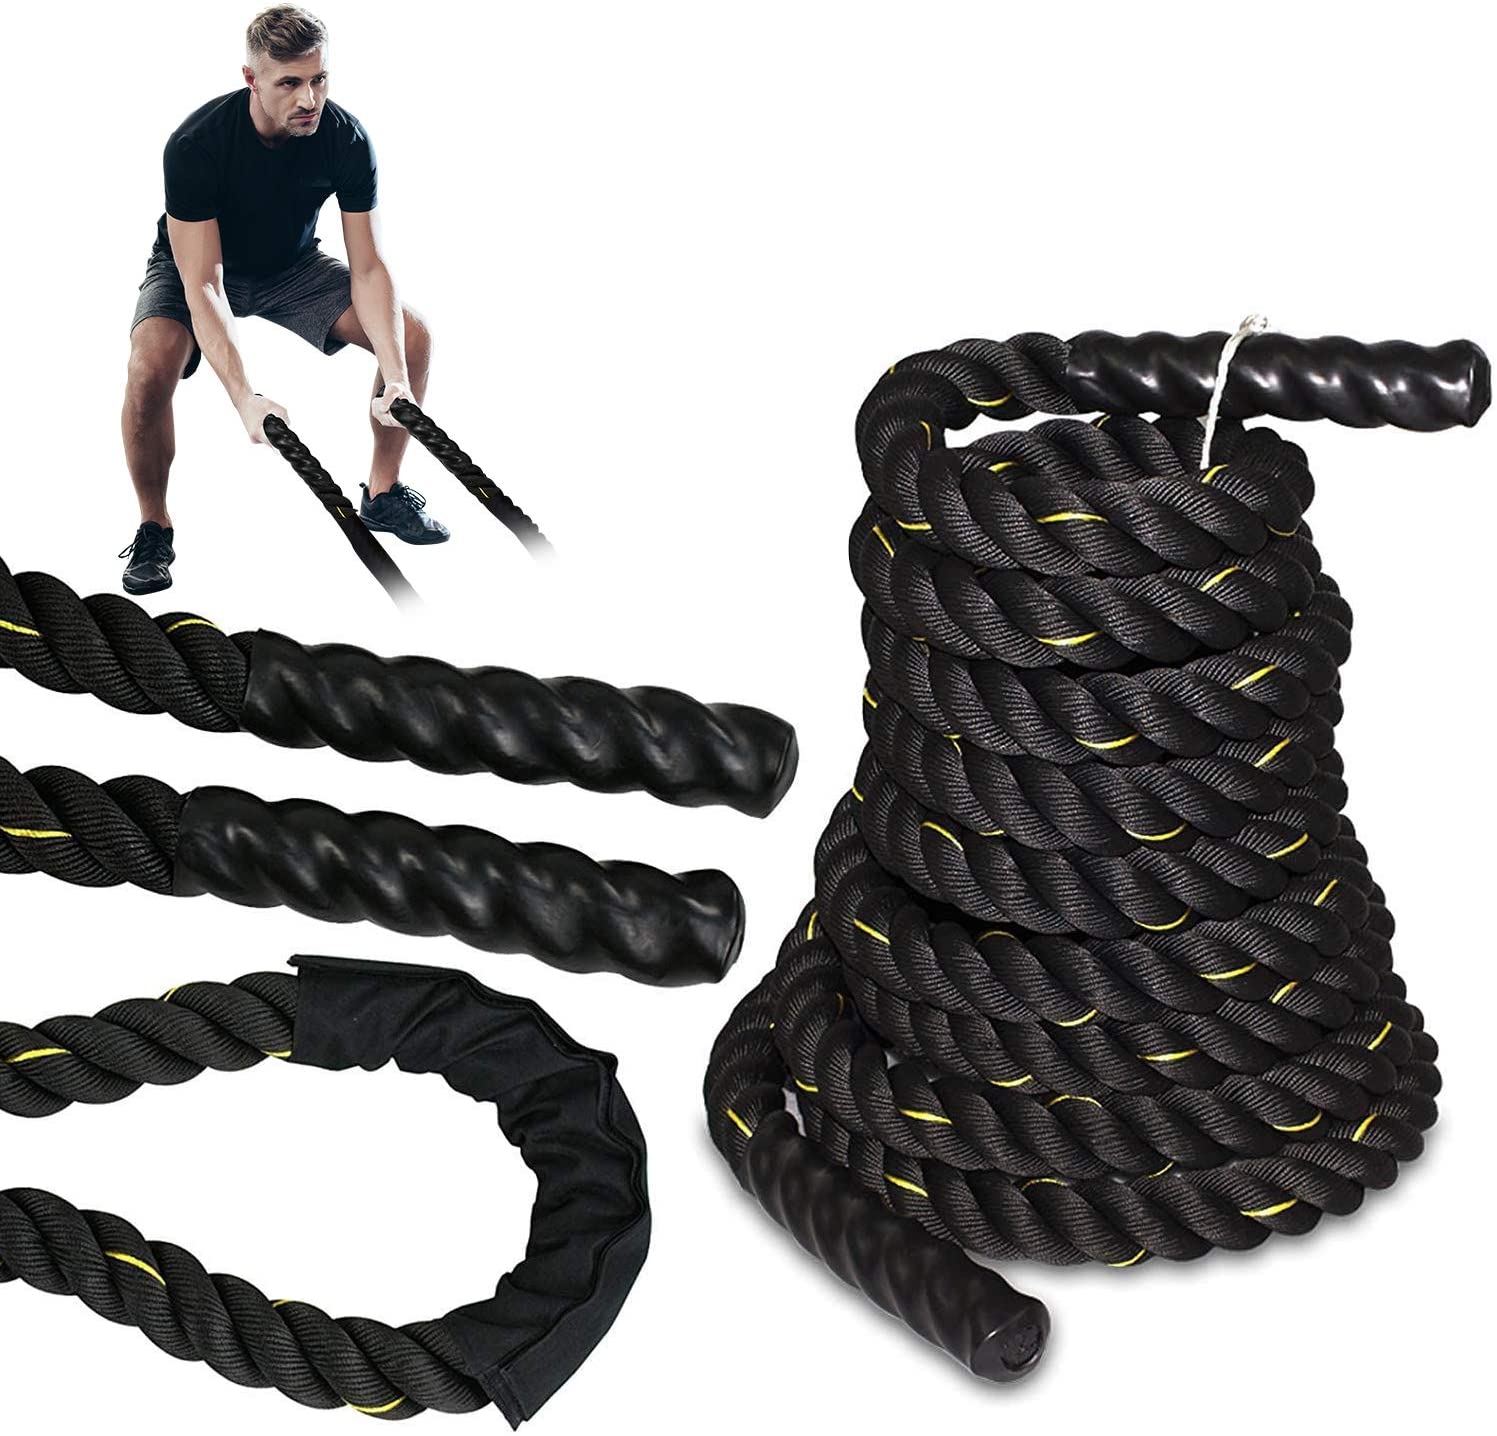 Black Workout Rope 100% Poly Dacron Heavy Battle Rope 1.5 Diameter 30 40 50 Lengths with Protective Sleeve